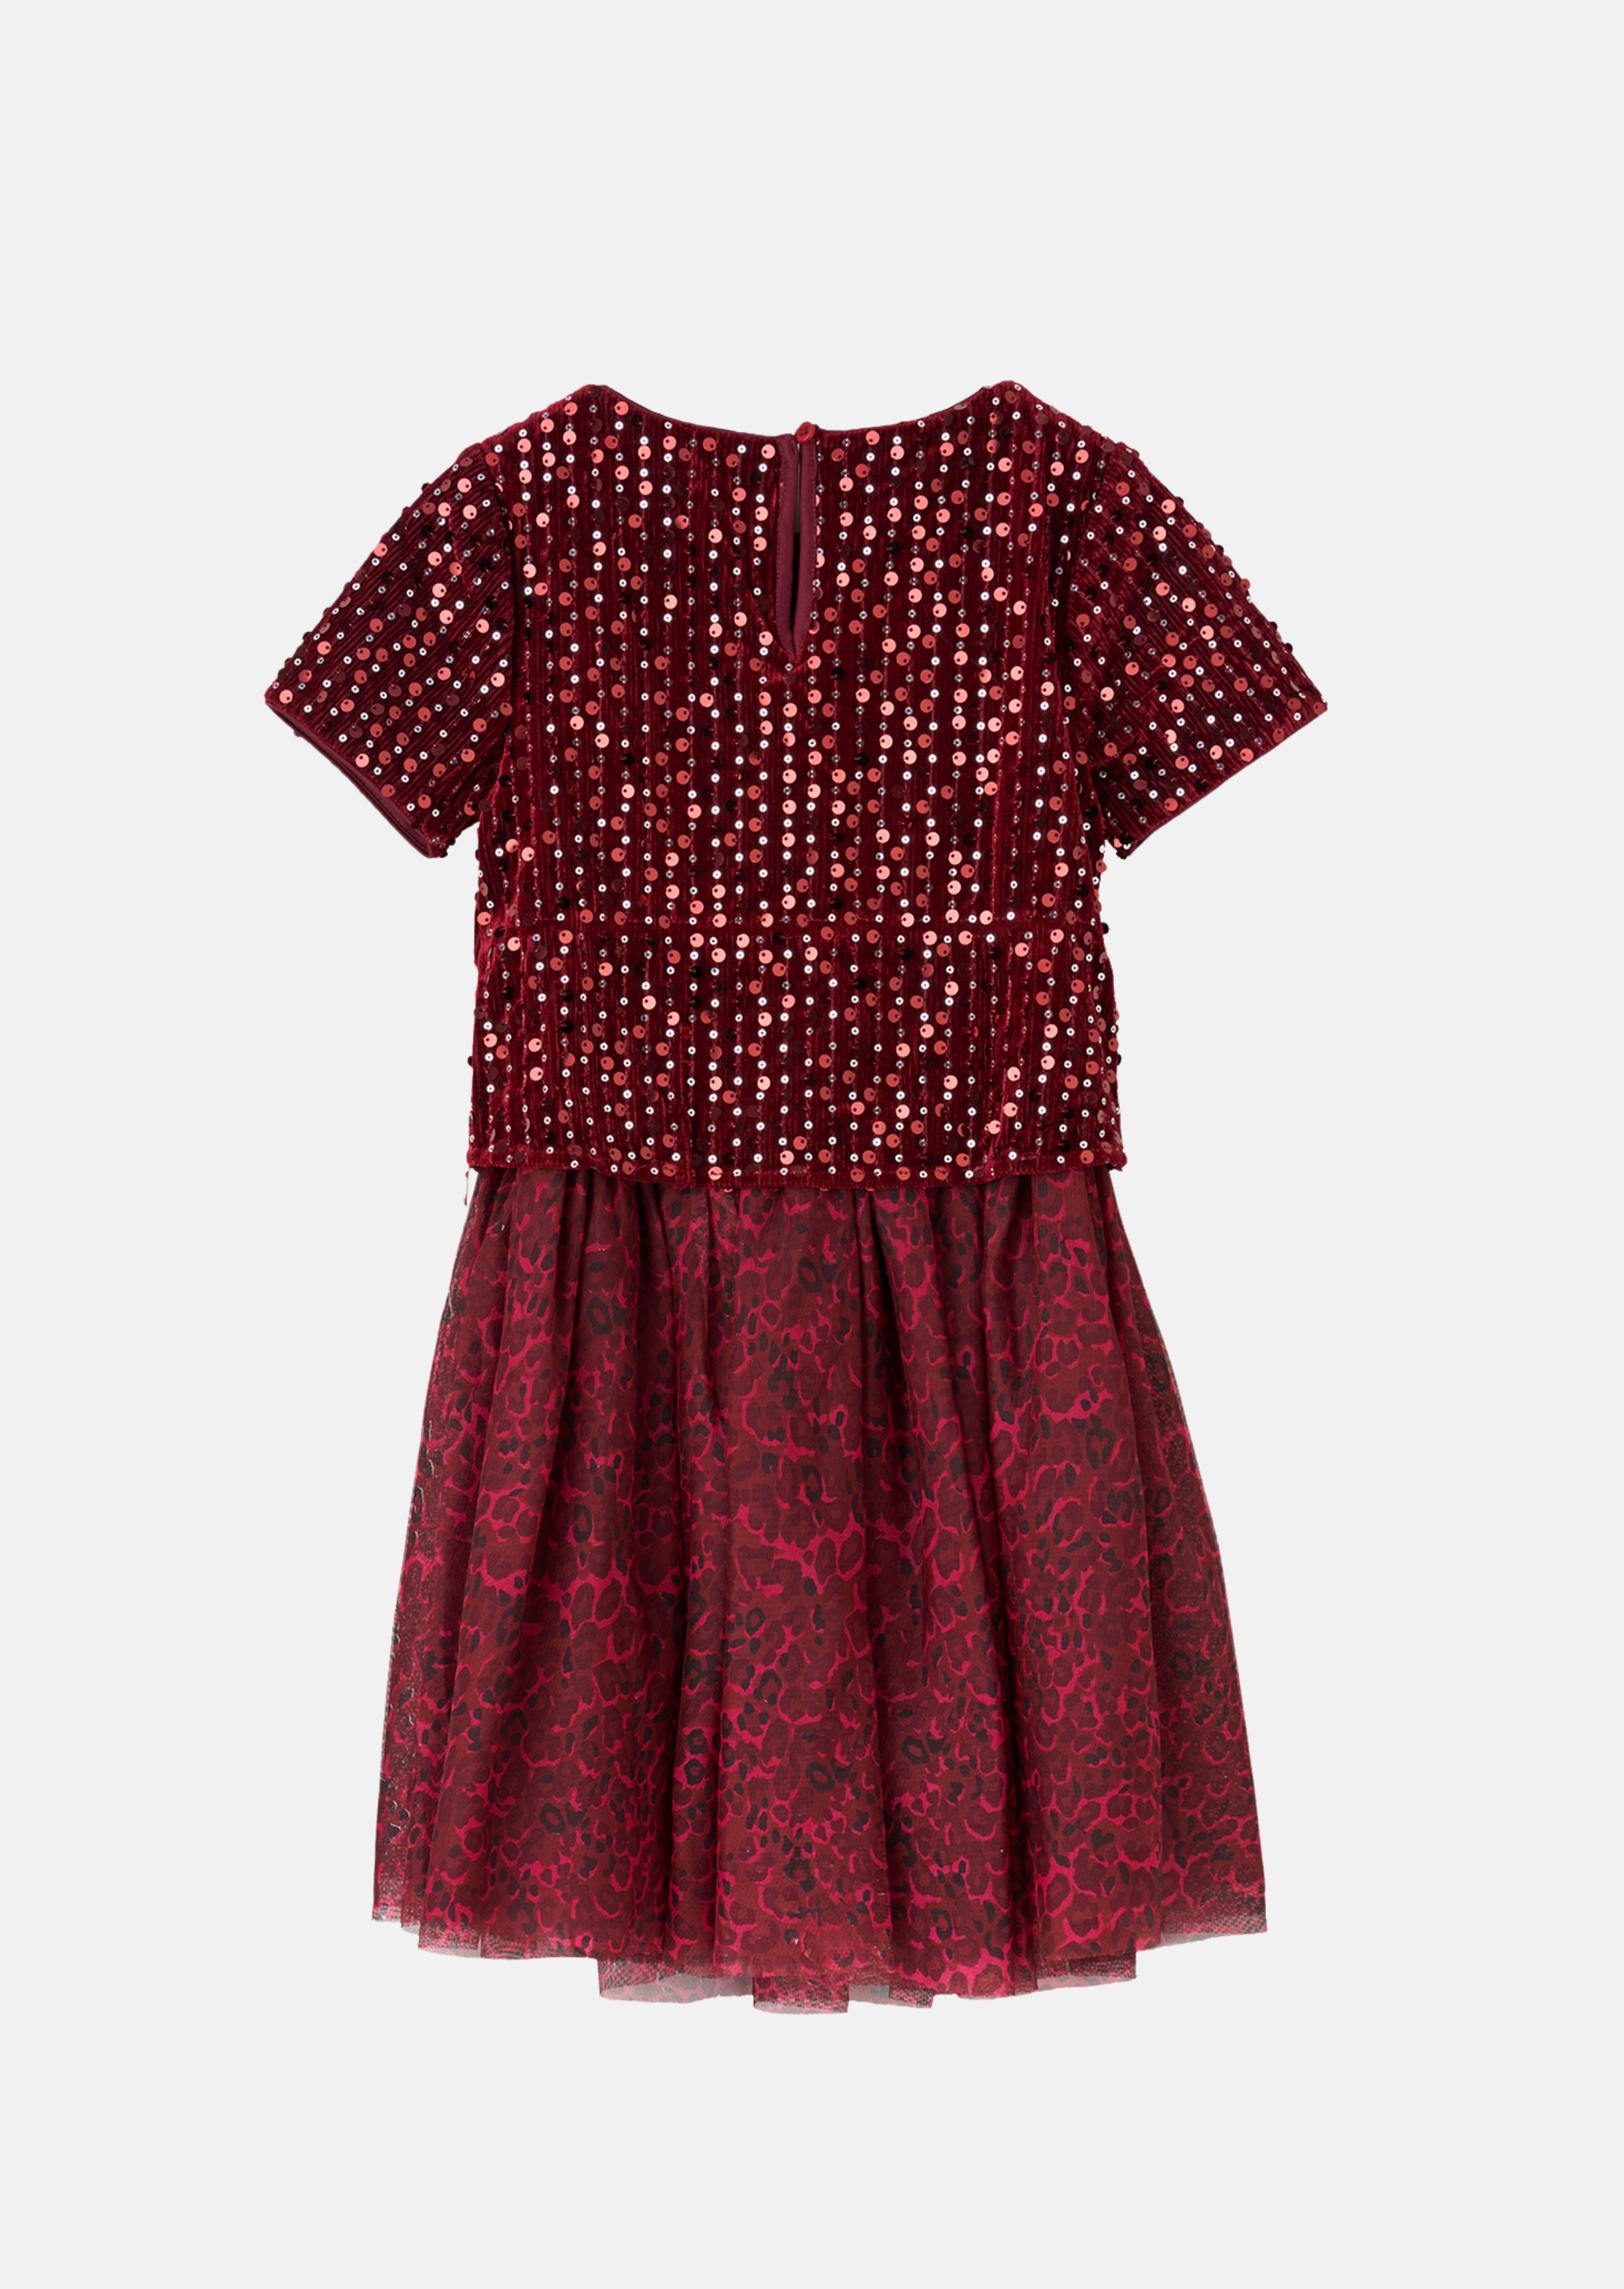 Girls Sequin Embellished and Printed Red Mesh Dress